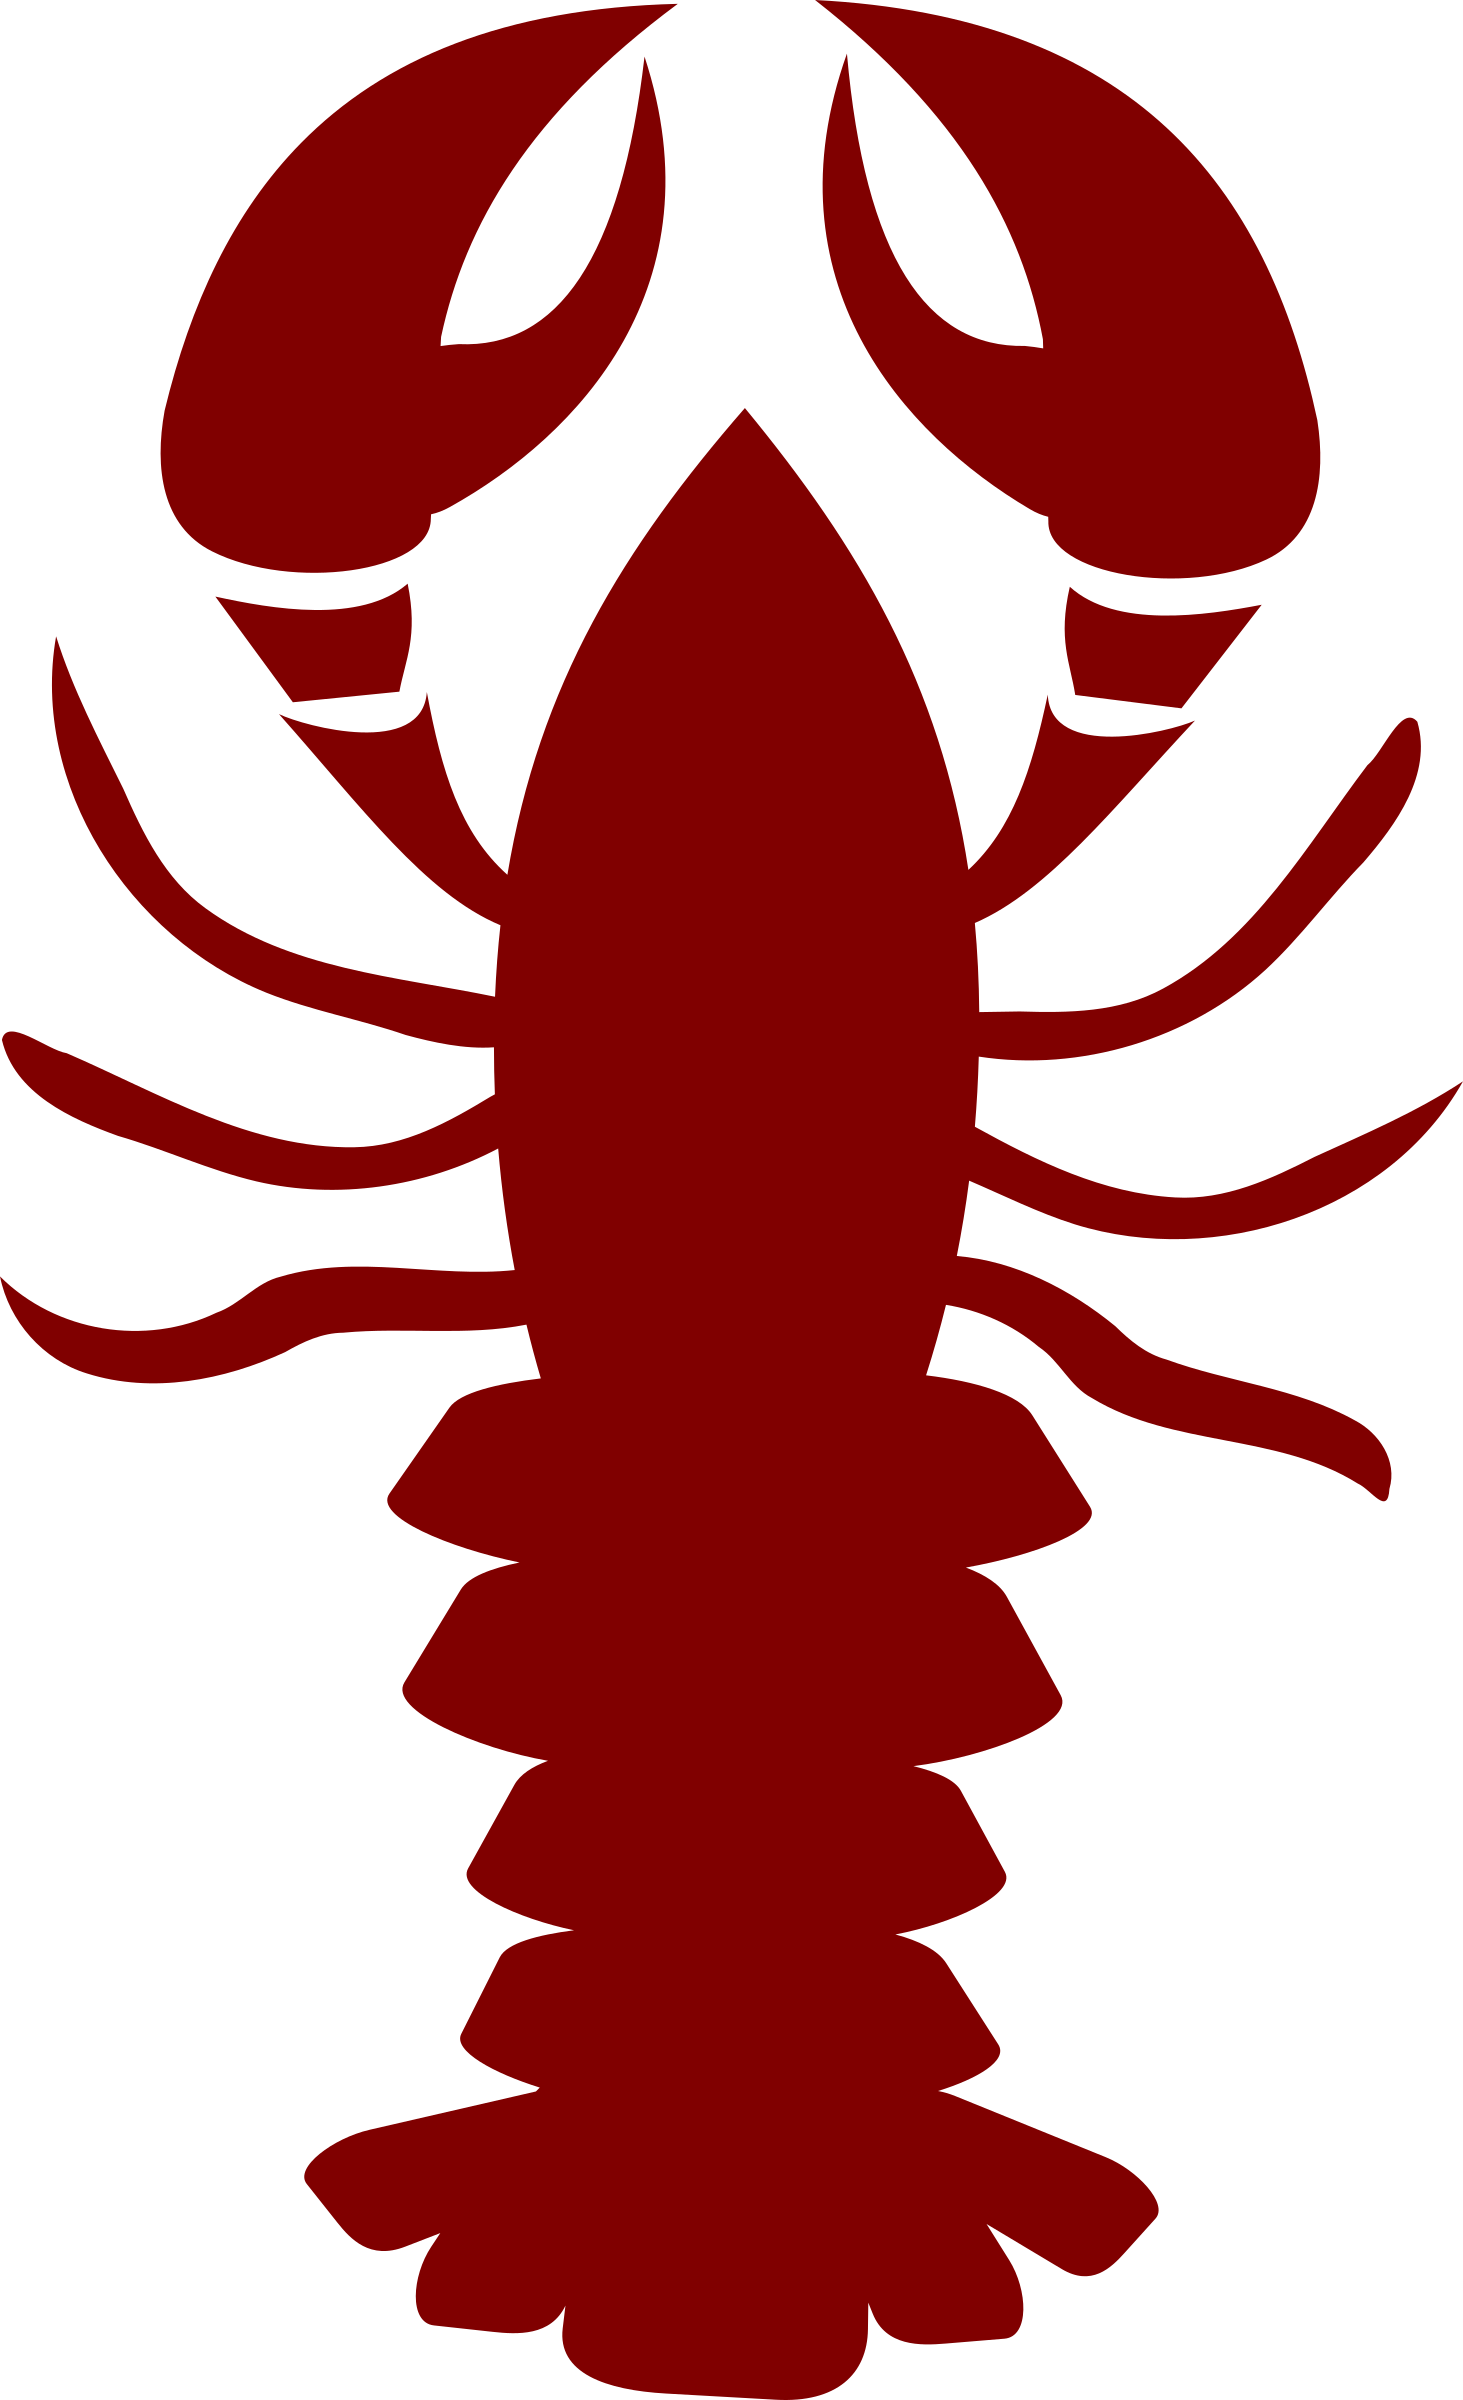 Lobster clipart icon, Lobster icon Transparent FREE for download on